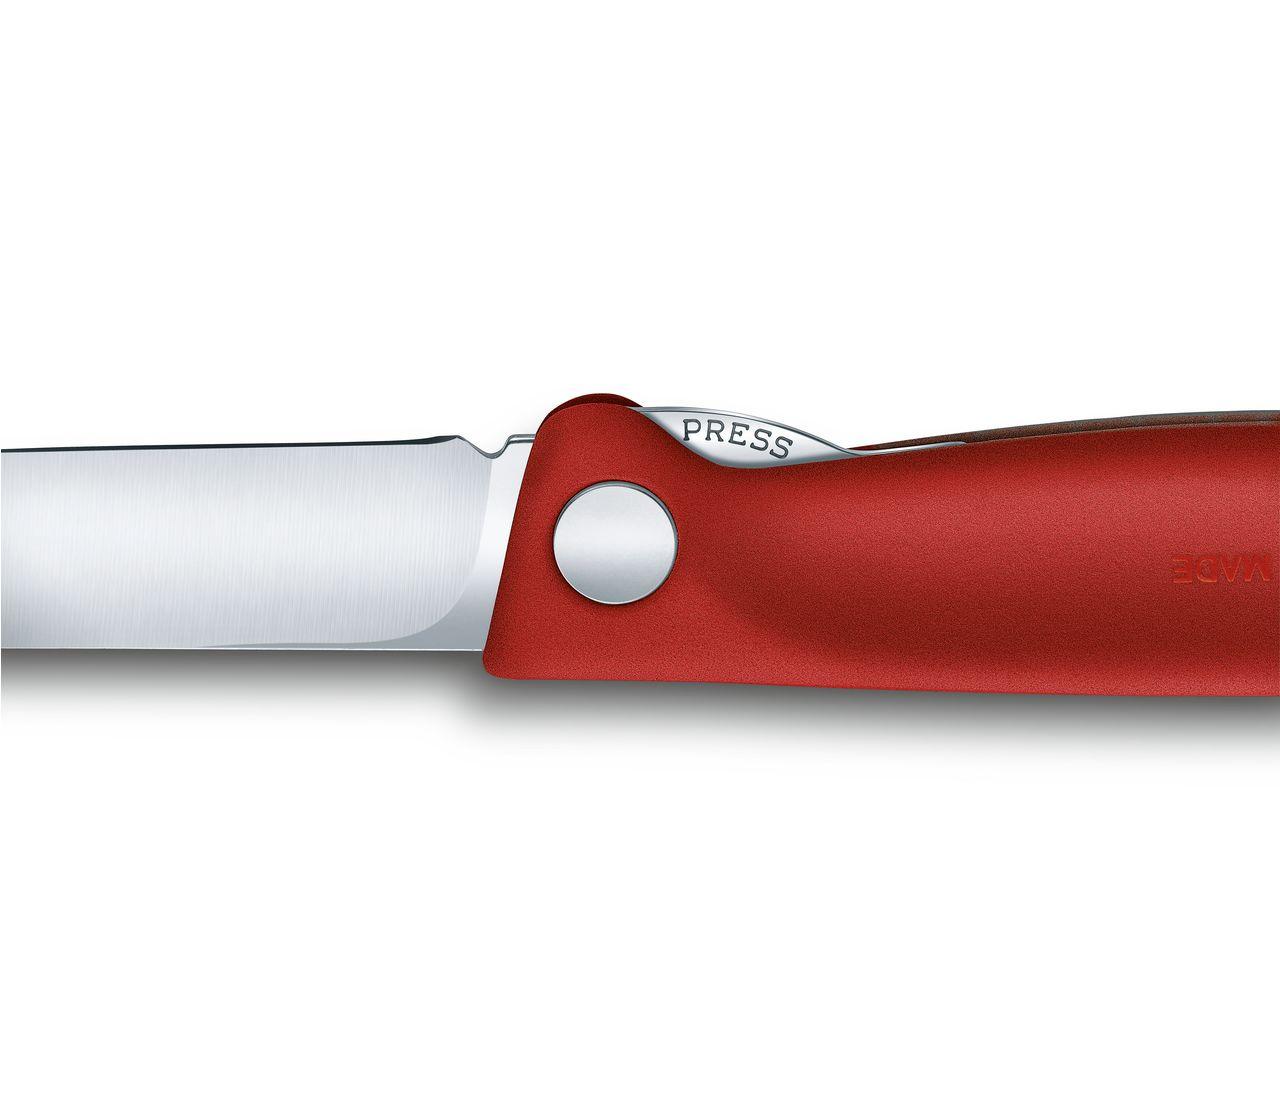 Victorinox Swiss Classic Paring Knife in red - 6.7431